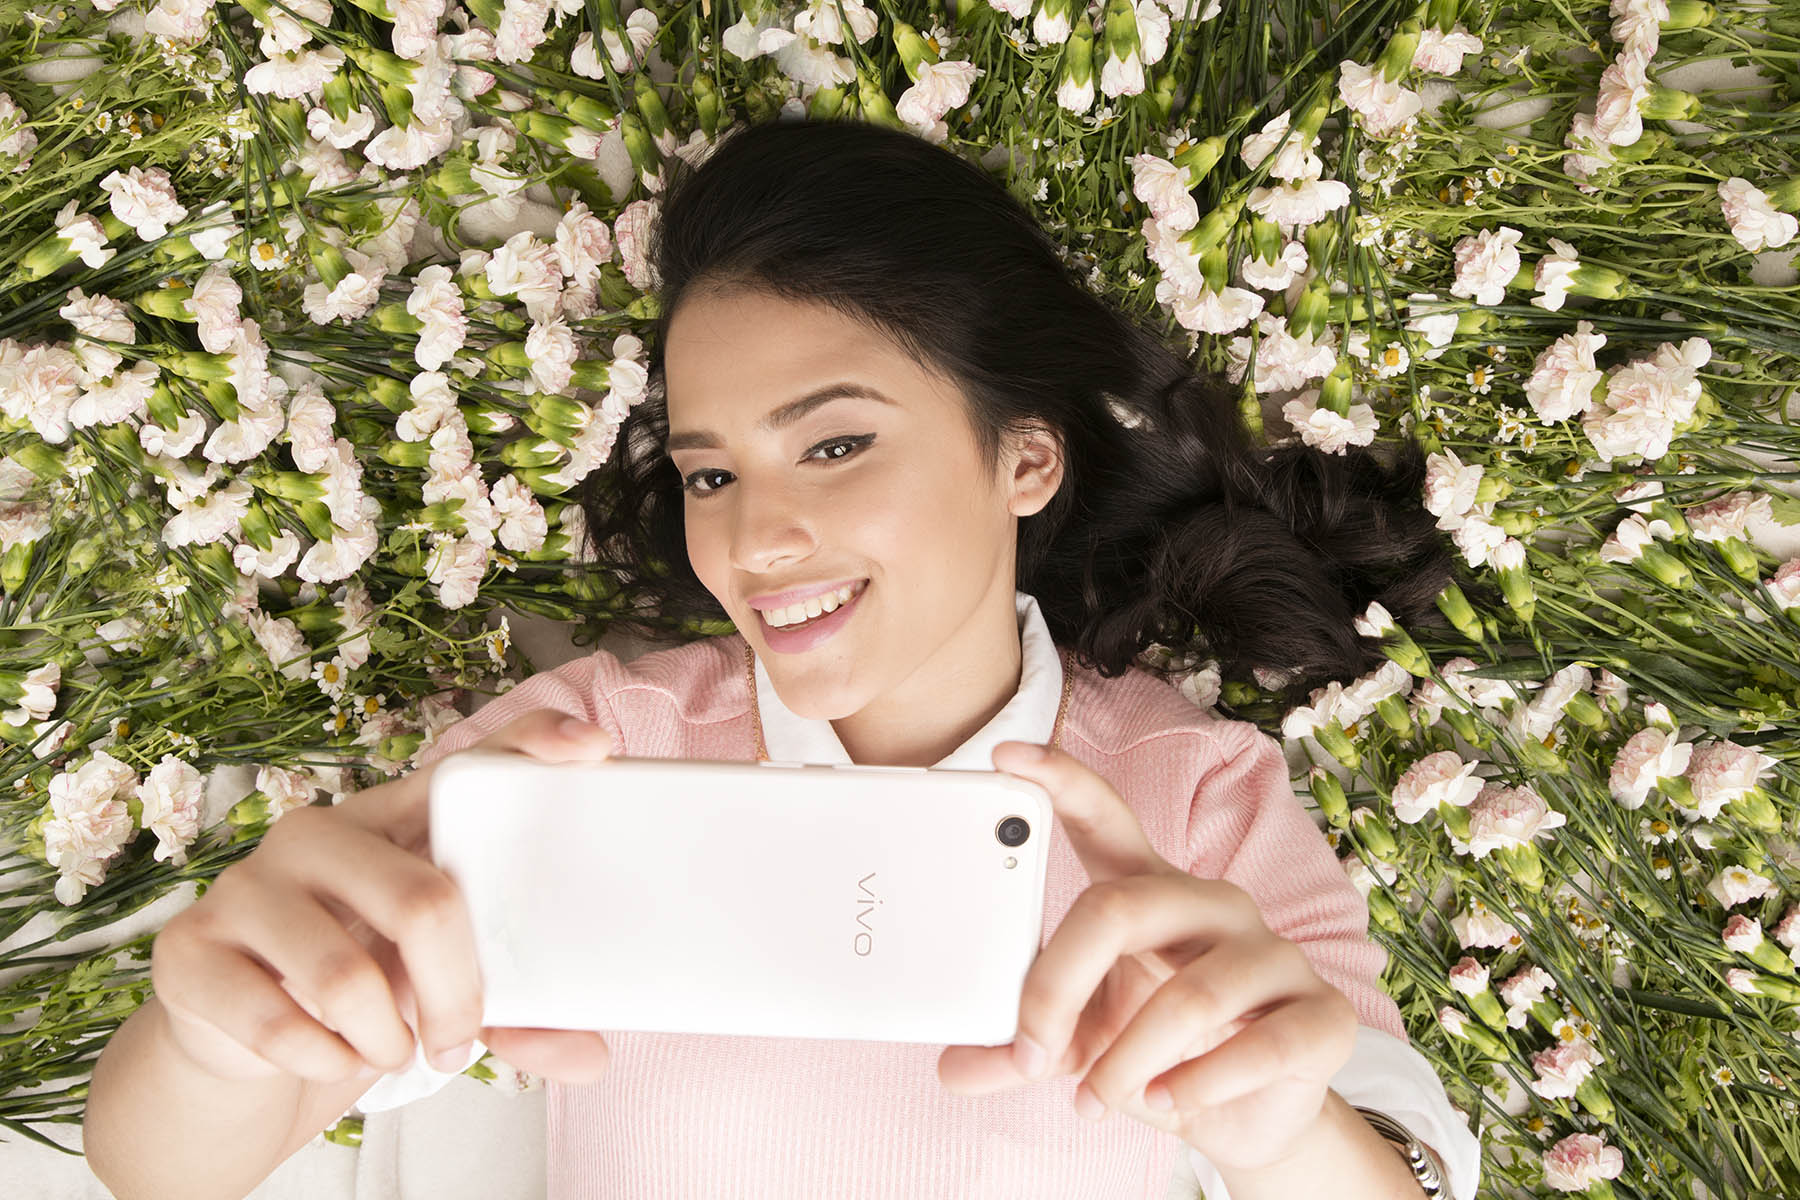 Make that selfies stand out with the Vivo V5s